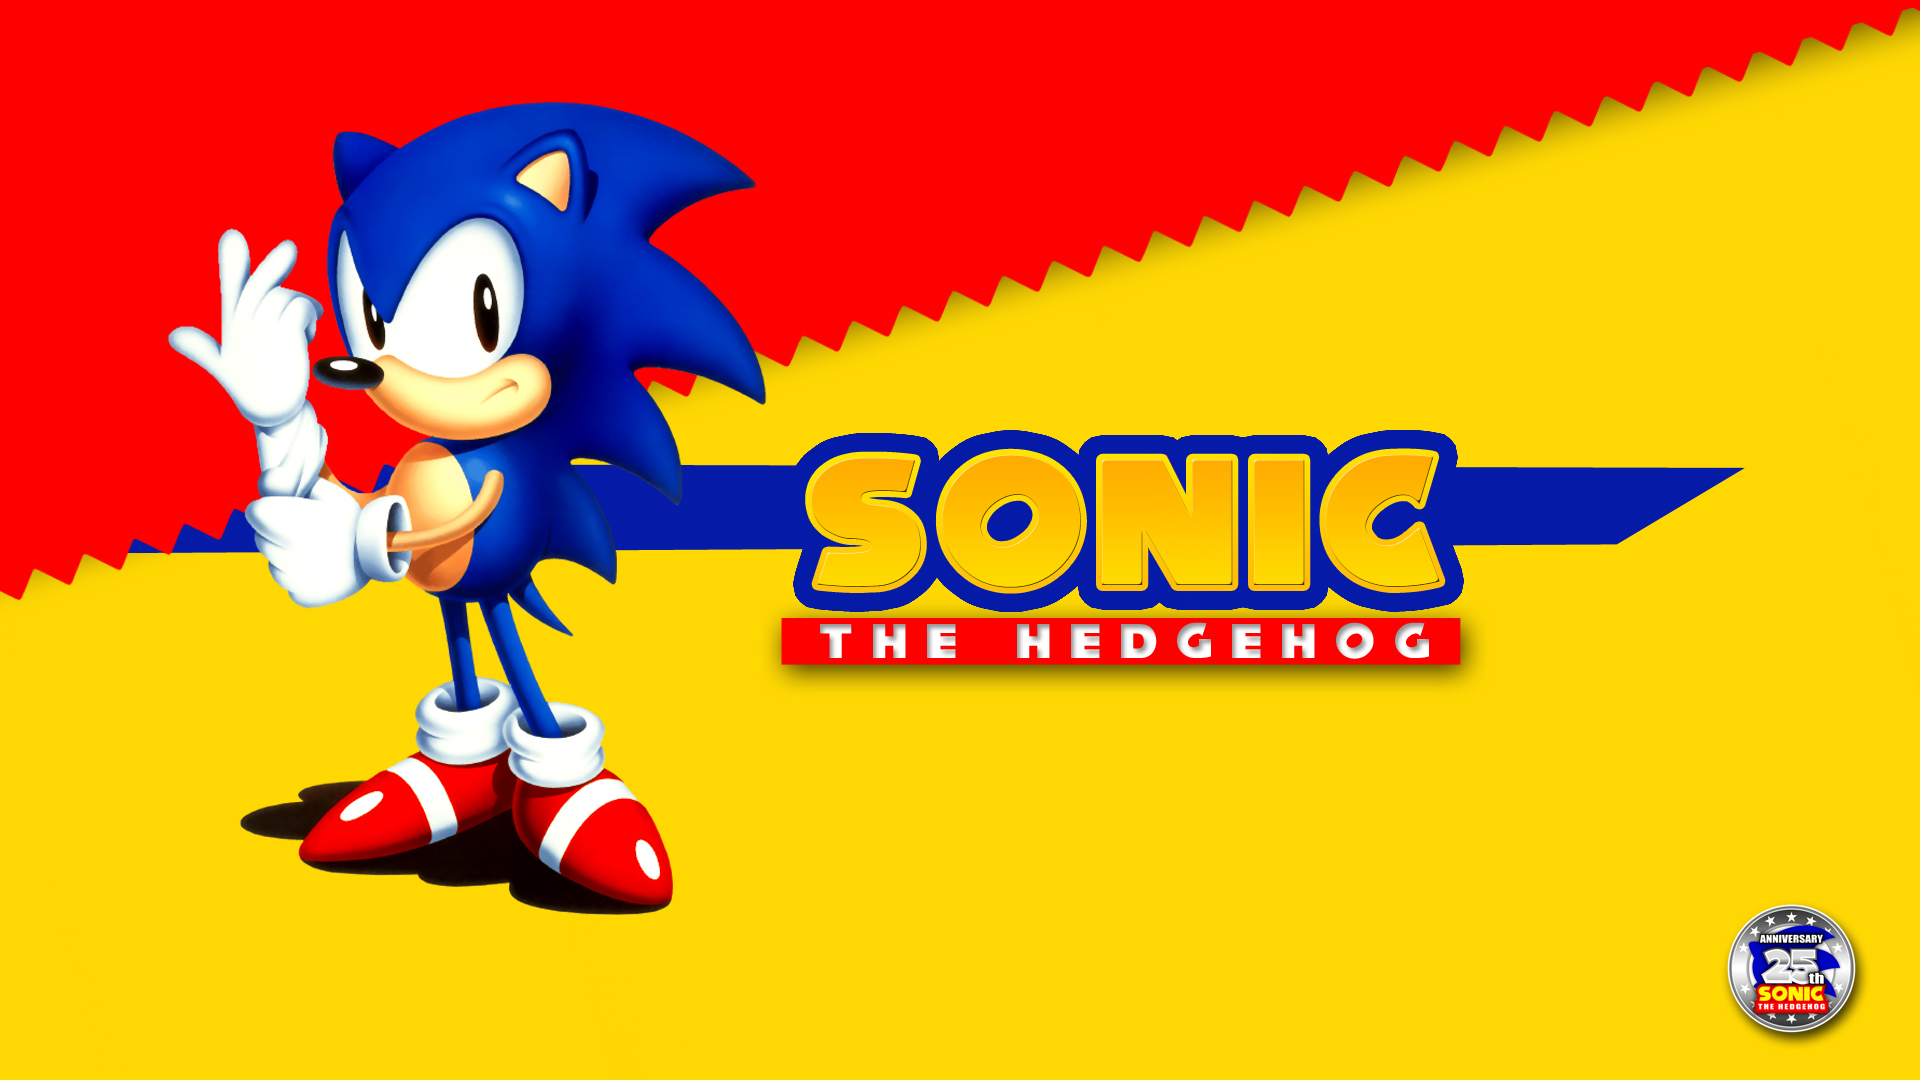 Sonic Video Game Art Video Game Characters Video Games Classic Games 1920x1080